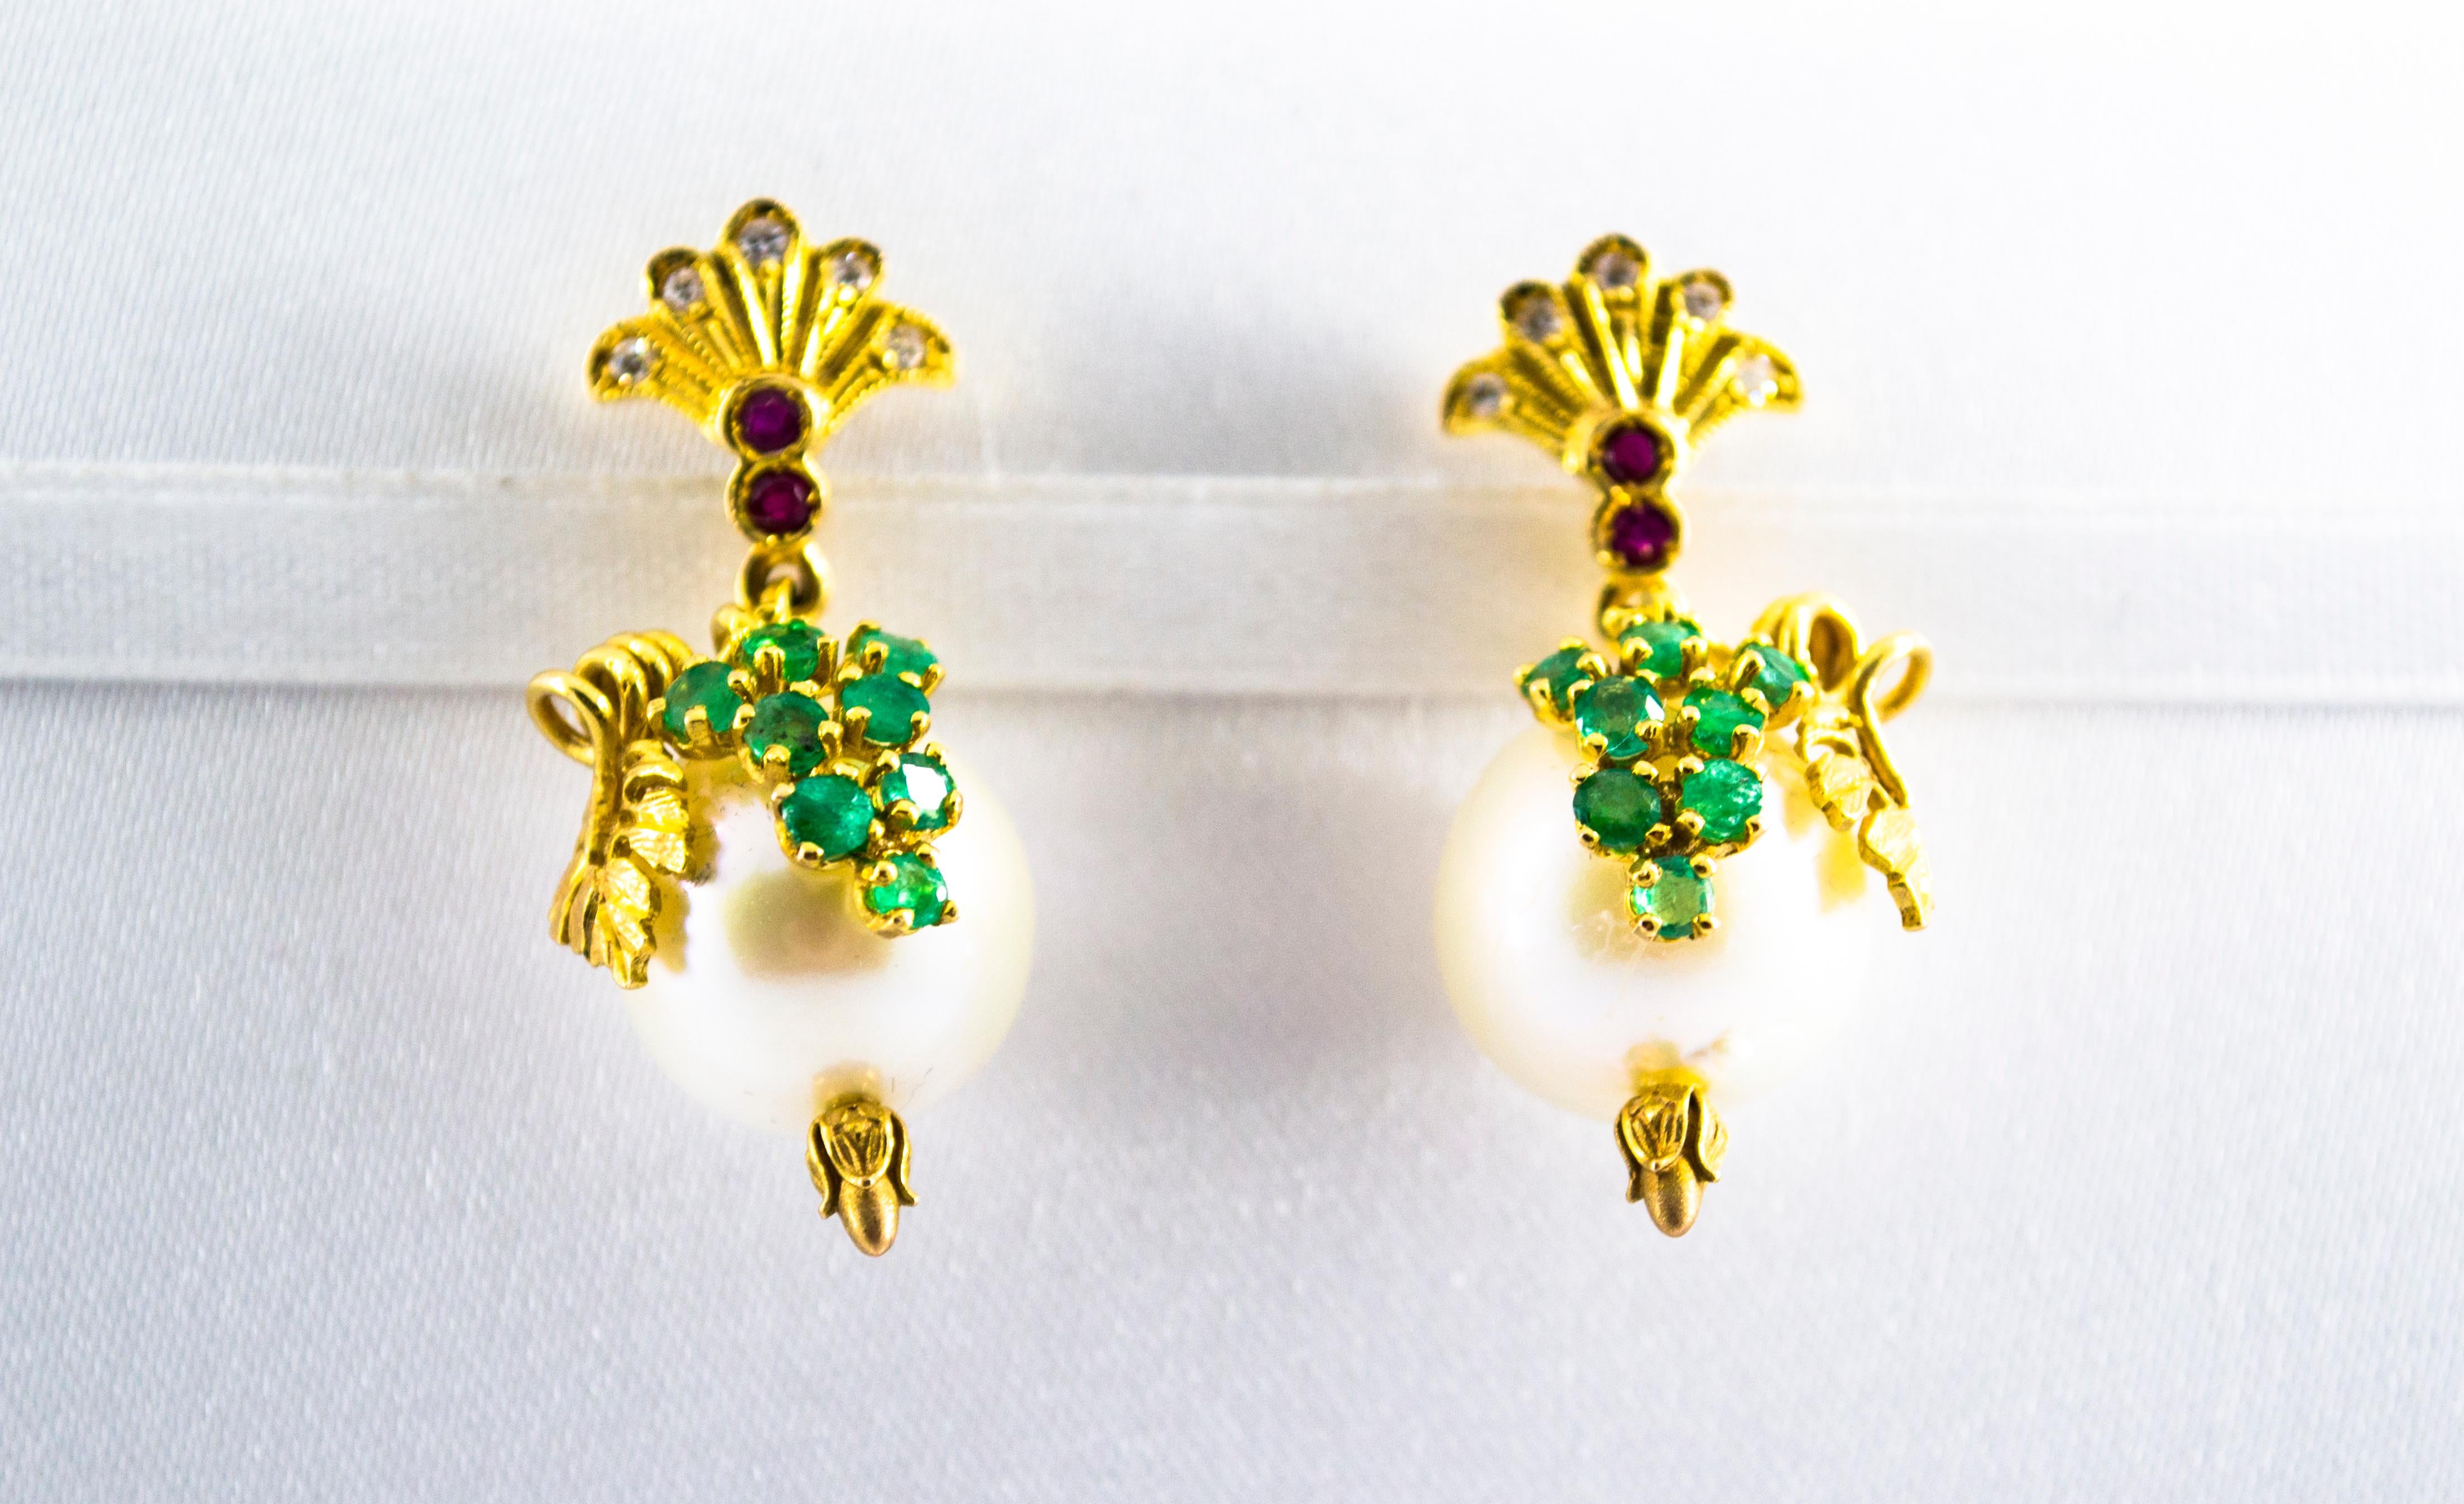 These earrings are made of 14K Yellow Gold.
They have 0.40 carats of Emeralds and Rubies, and cultured pearls.
They have also 0.15 Carats of White Diamonds.

With these earrings, Luigi Ferrara wanted to pay homage to the Roman deity Bacchus (In